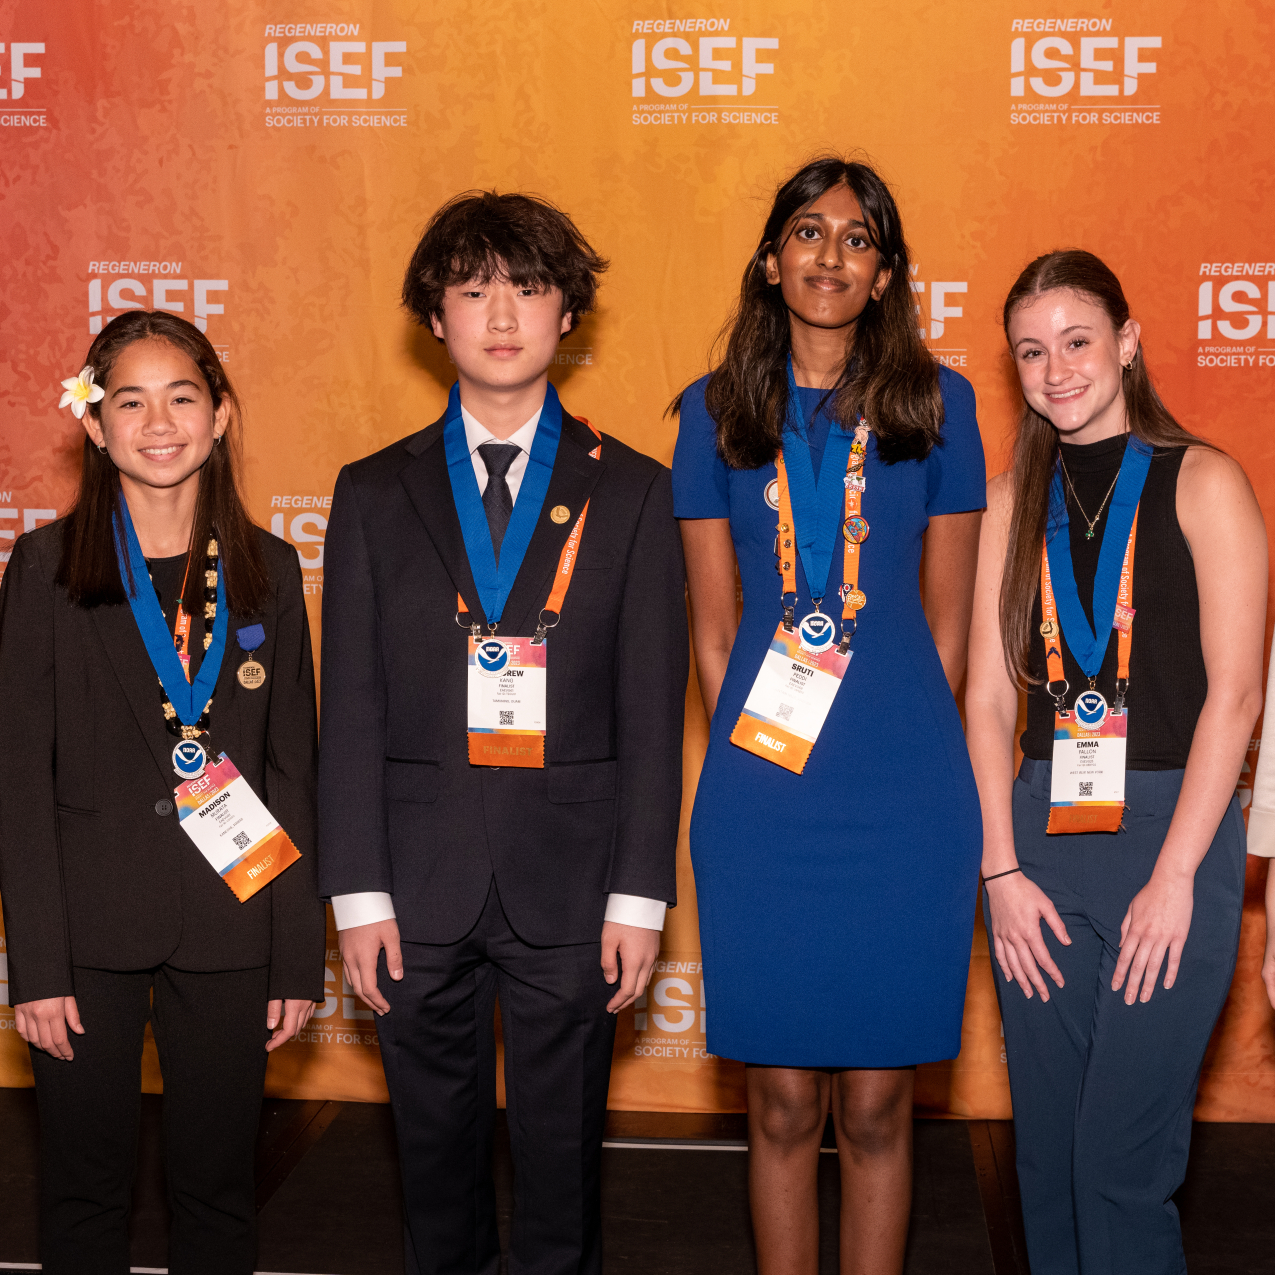 Five smiling high school students wearing blue NOAA award medals standing in front of an orange background. 